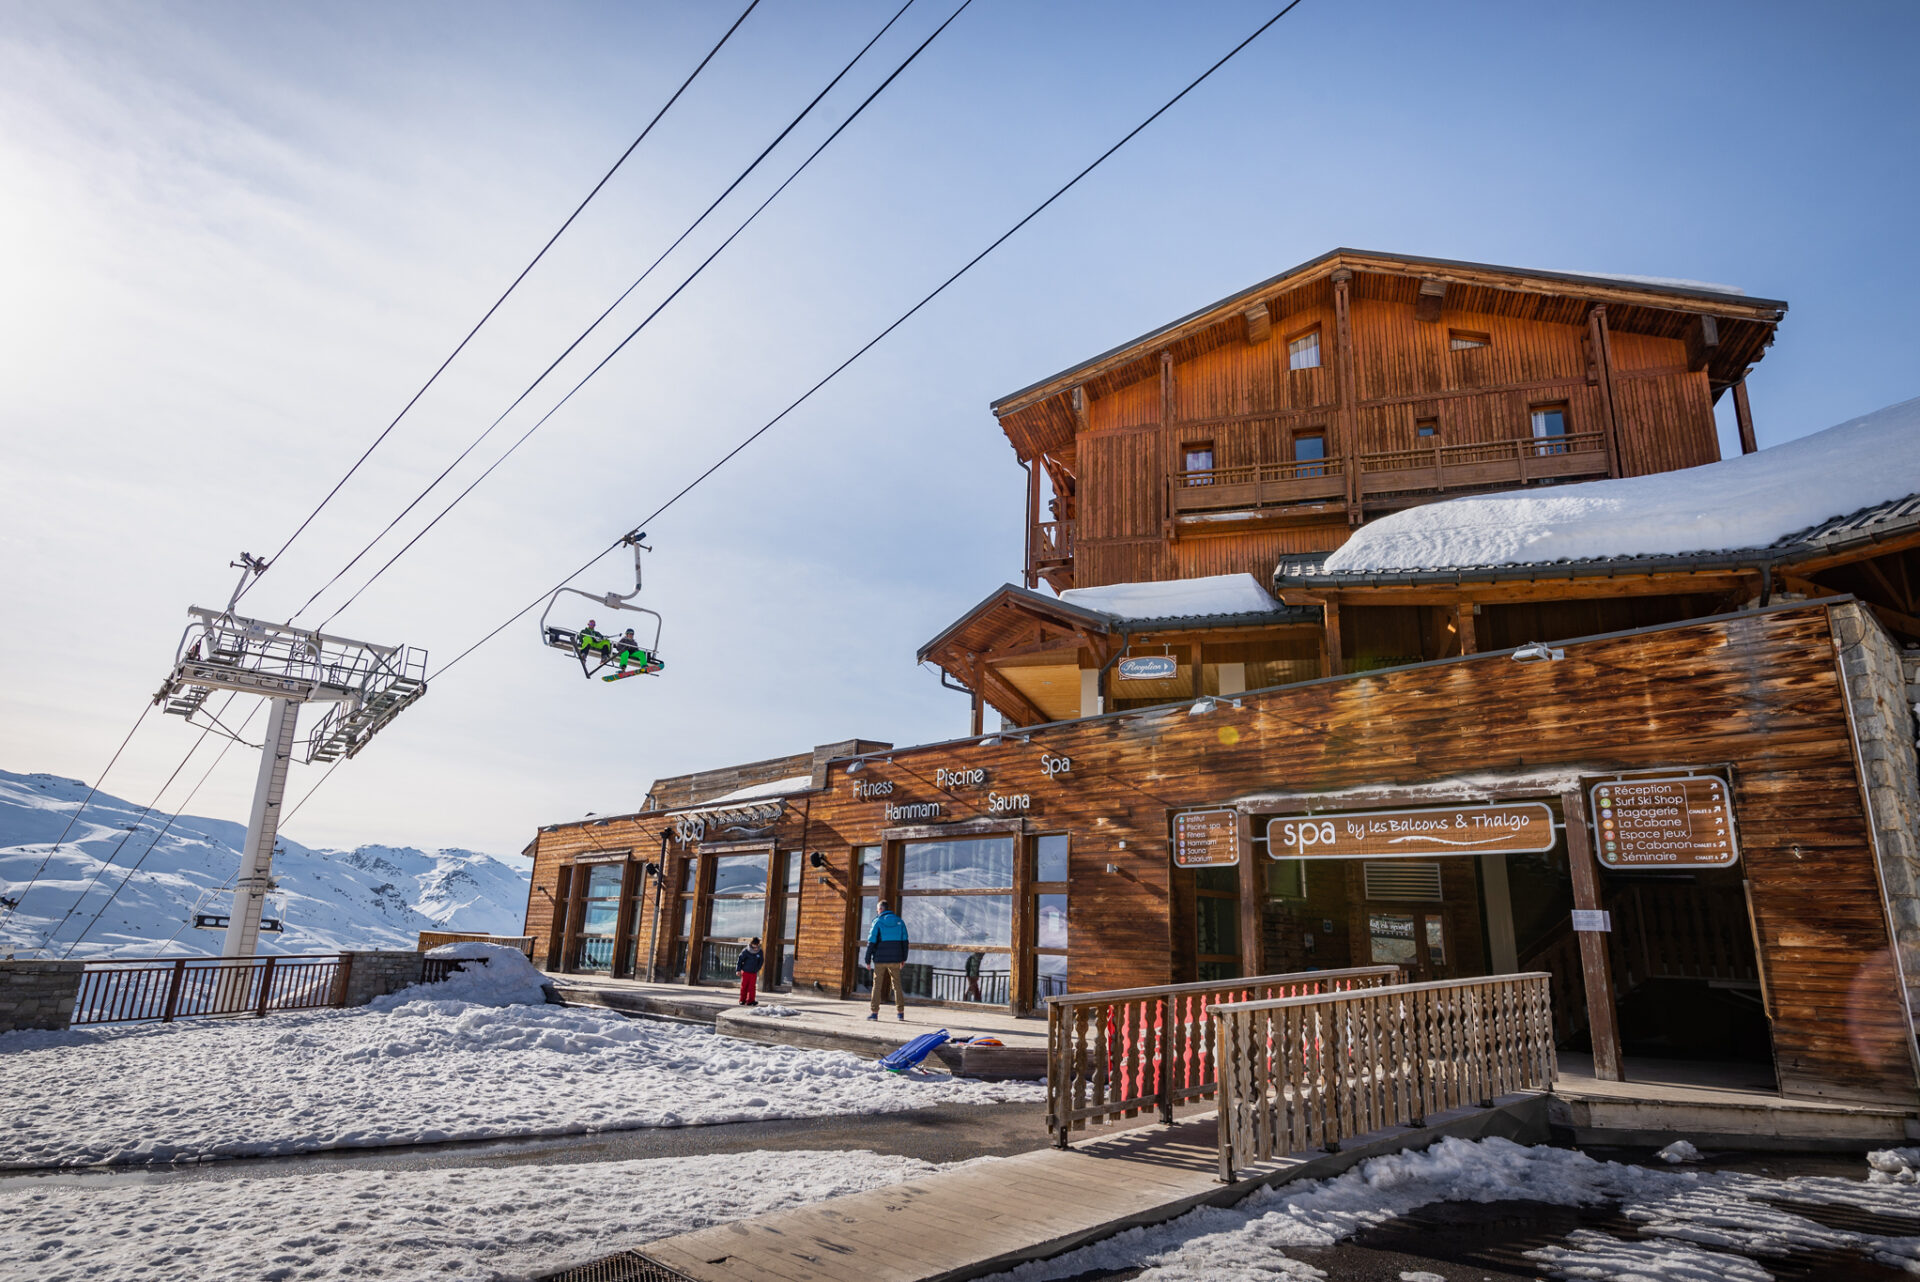 An image of the ski lift going over Les Balcons de Val Thorens